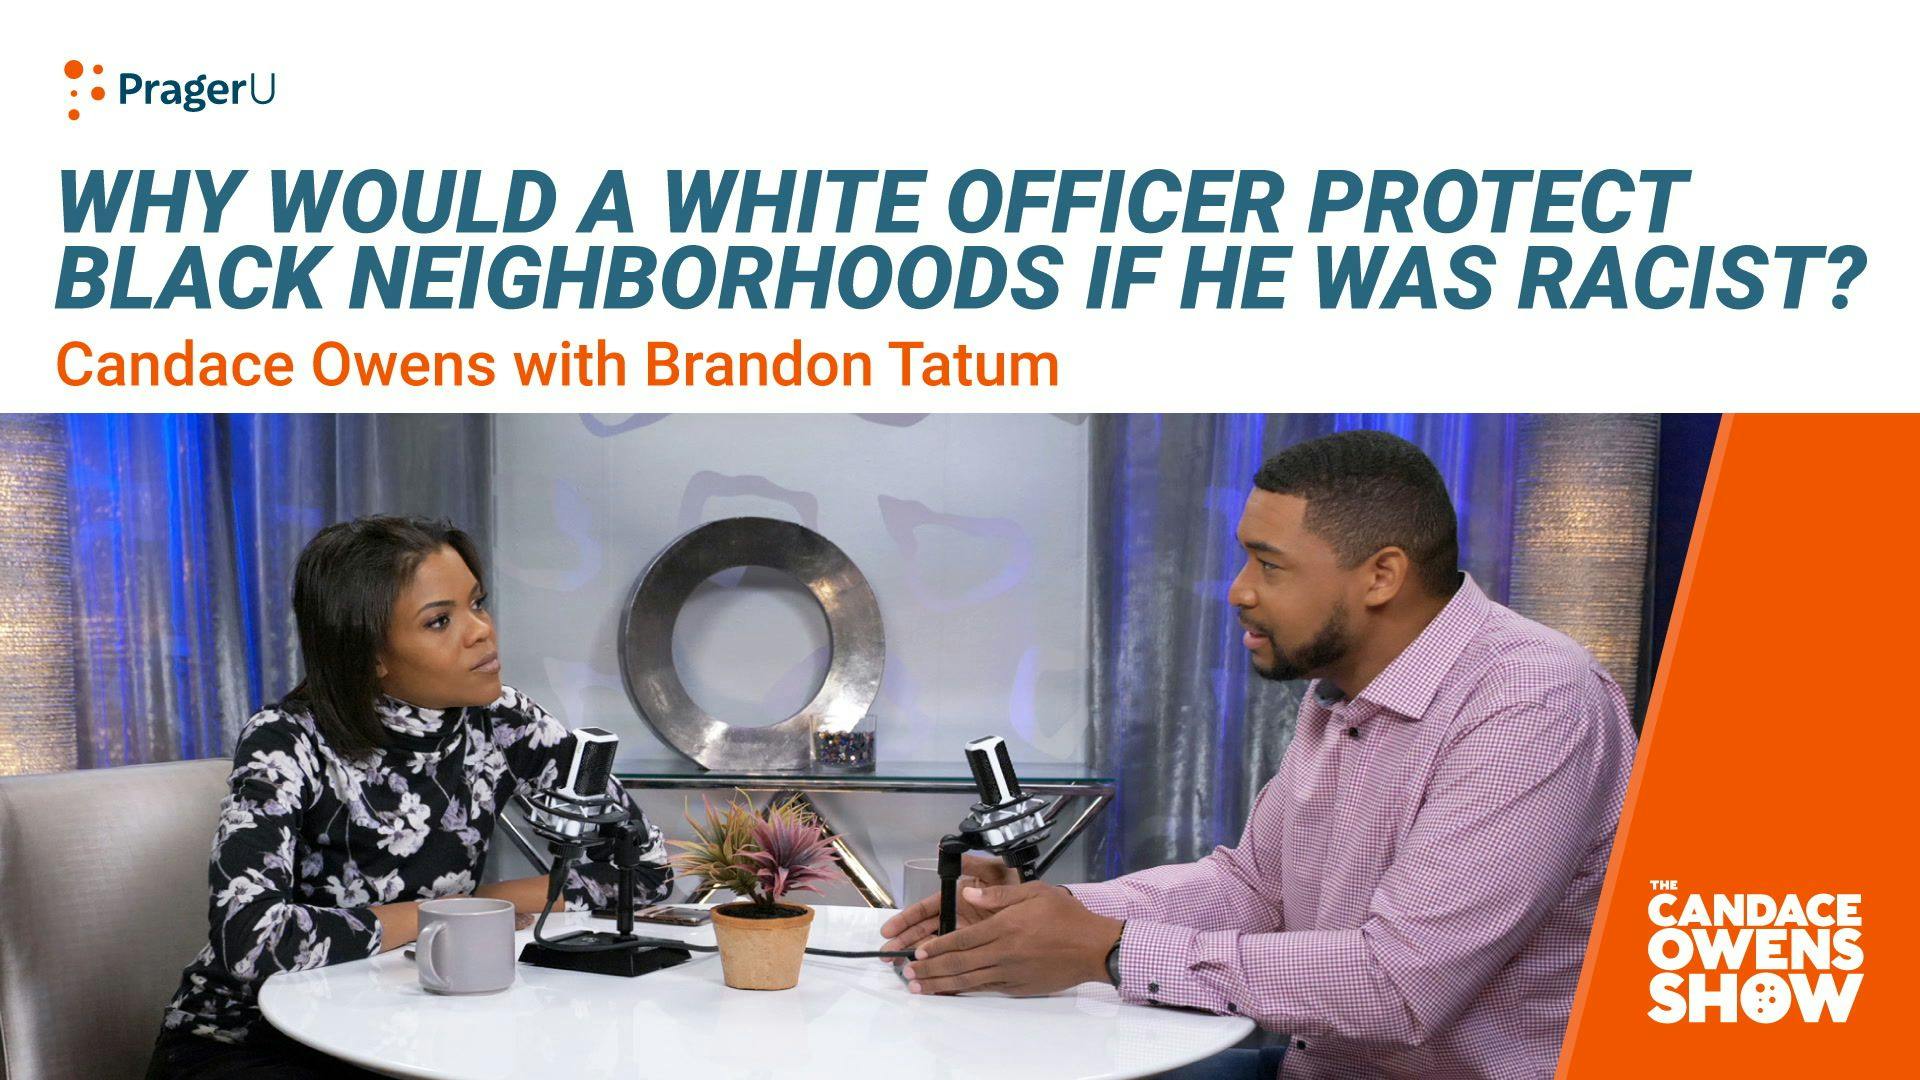 Why Would a White Officer Protect Black Neighborhoods If He Was Racist?